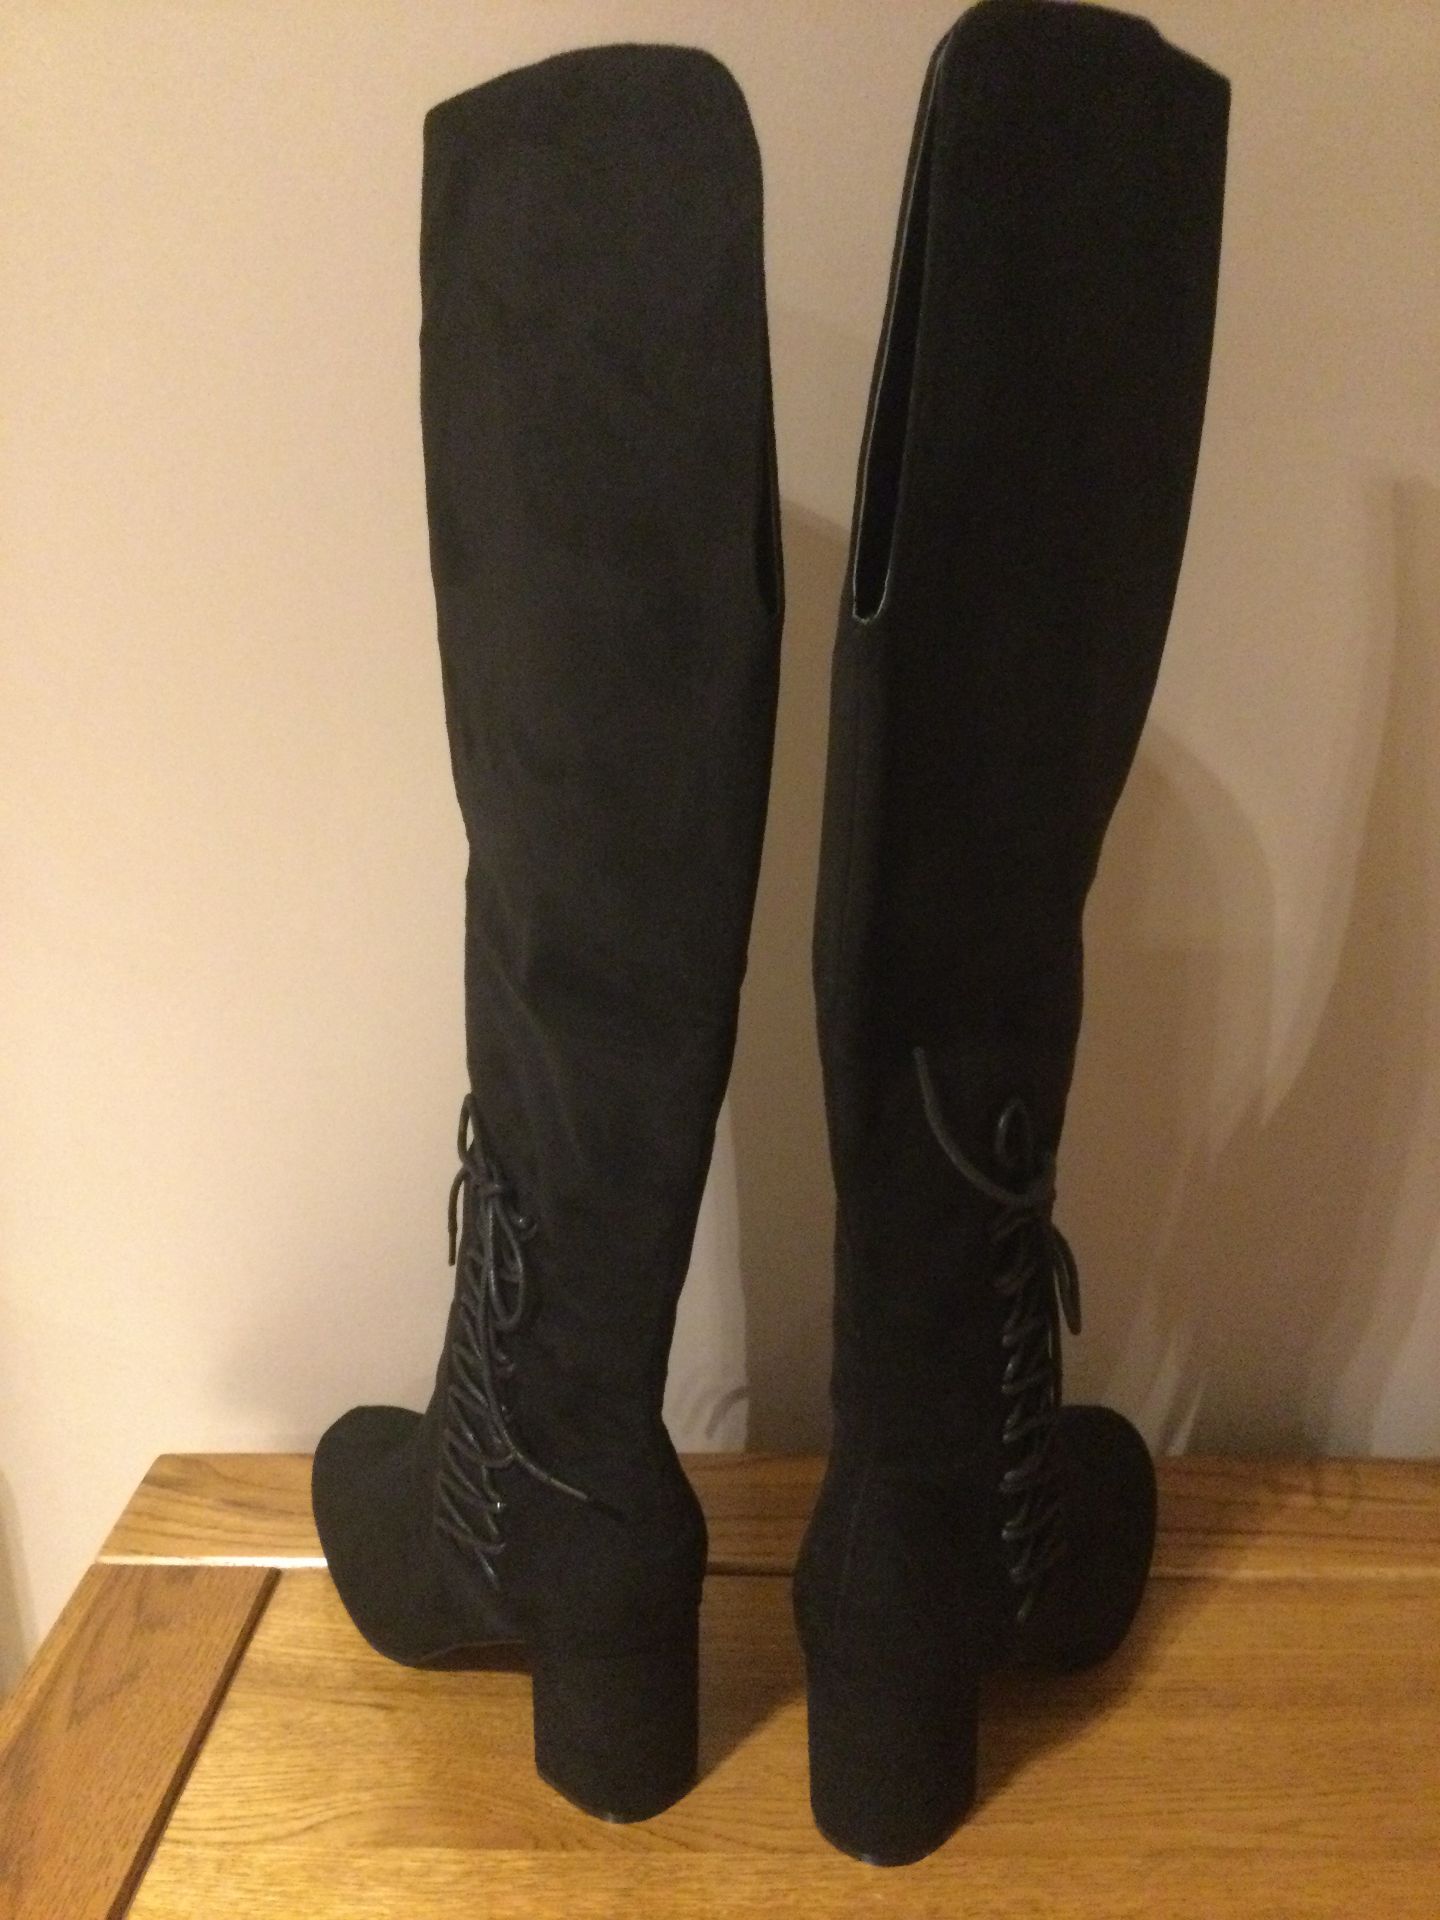 Dolcis “Emma” Long Boots, Block Heel, Size 5, Black - New RRP £55.00 - Image 5 of 7